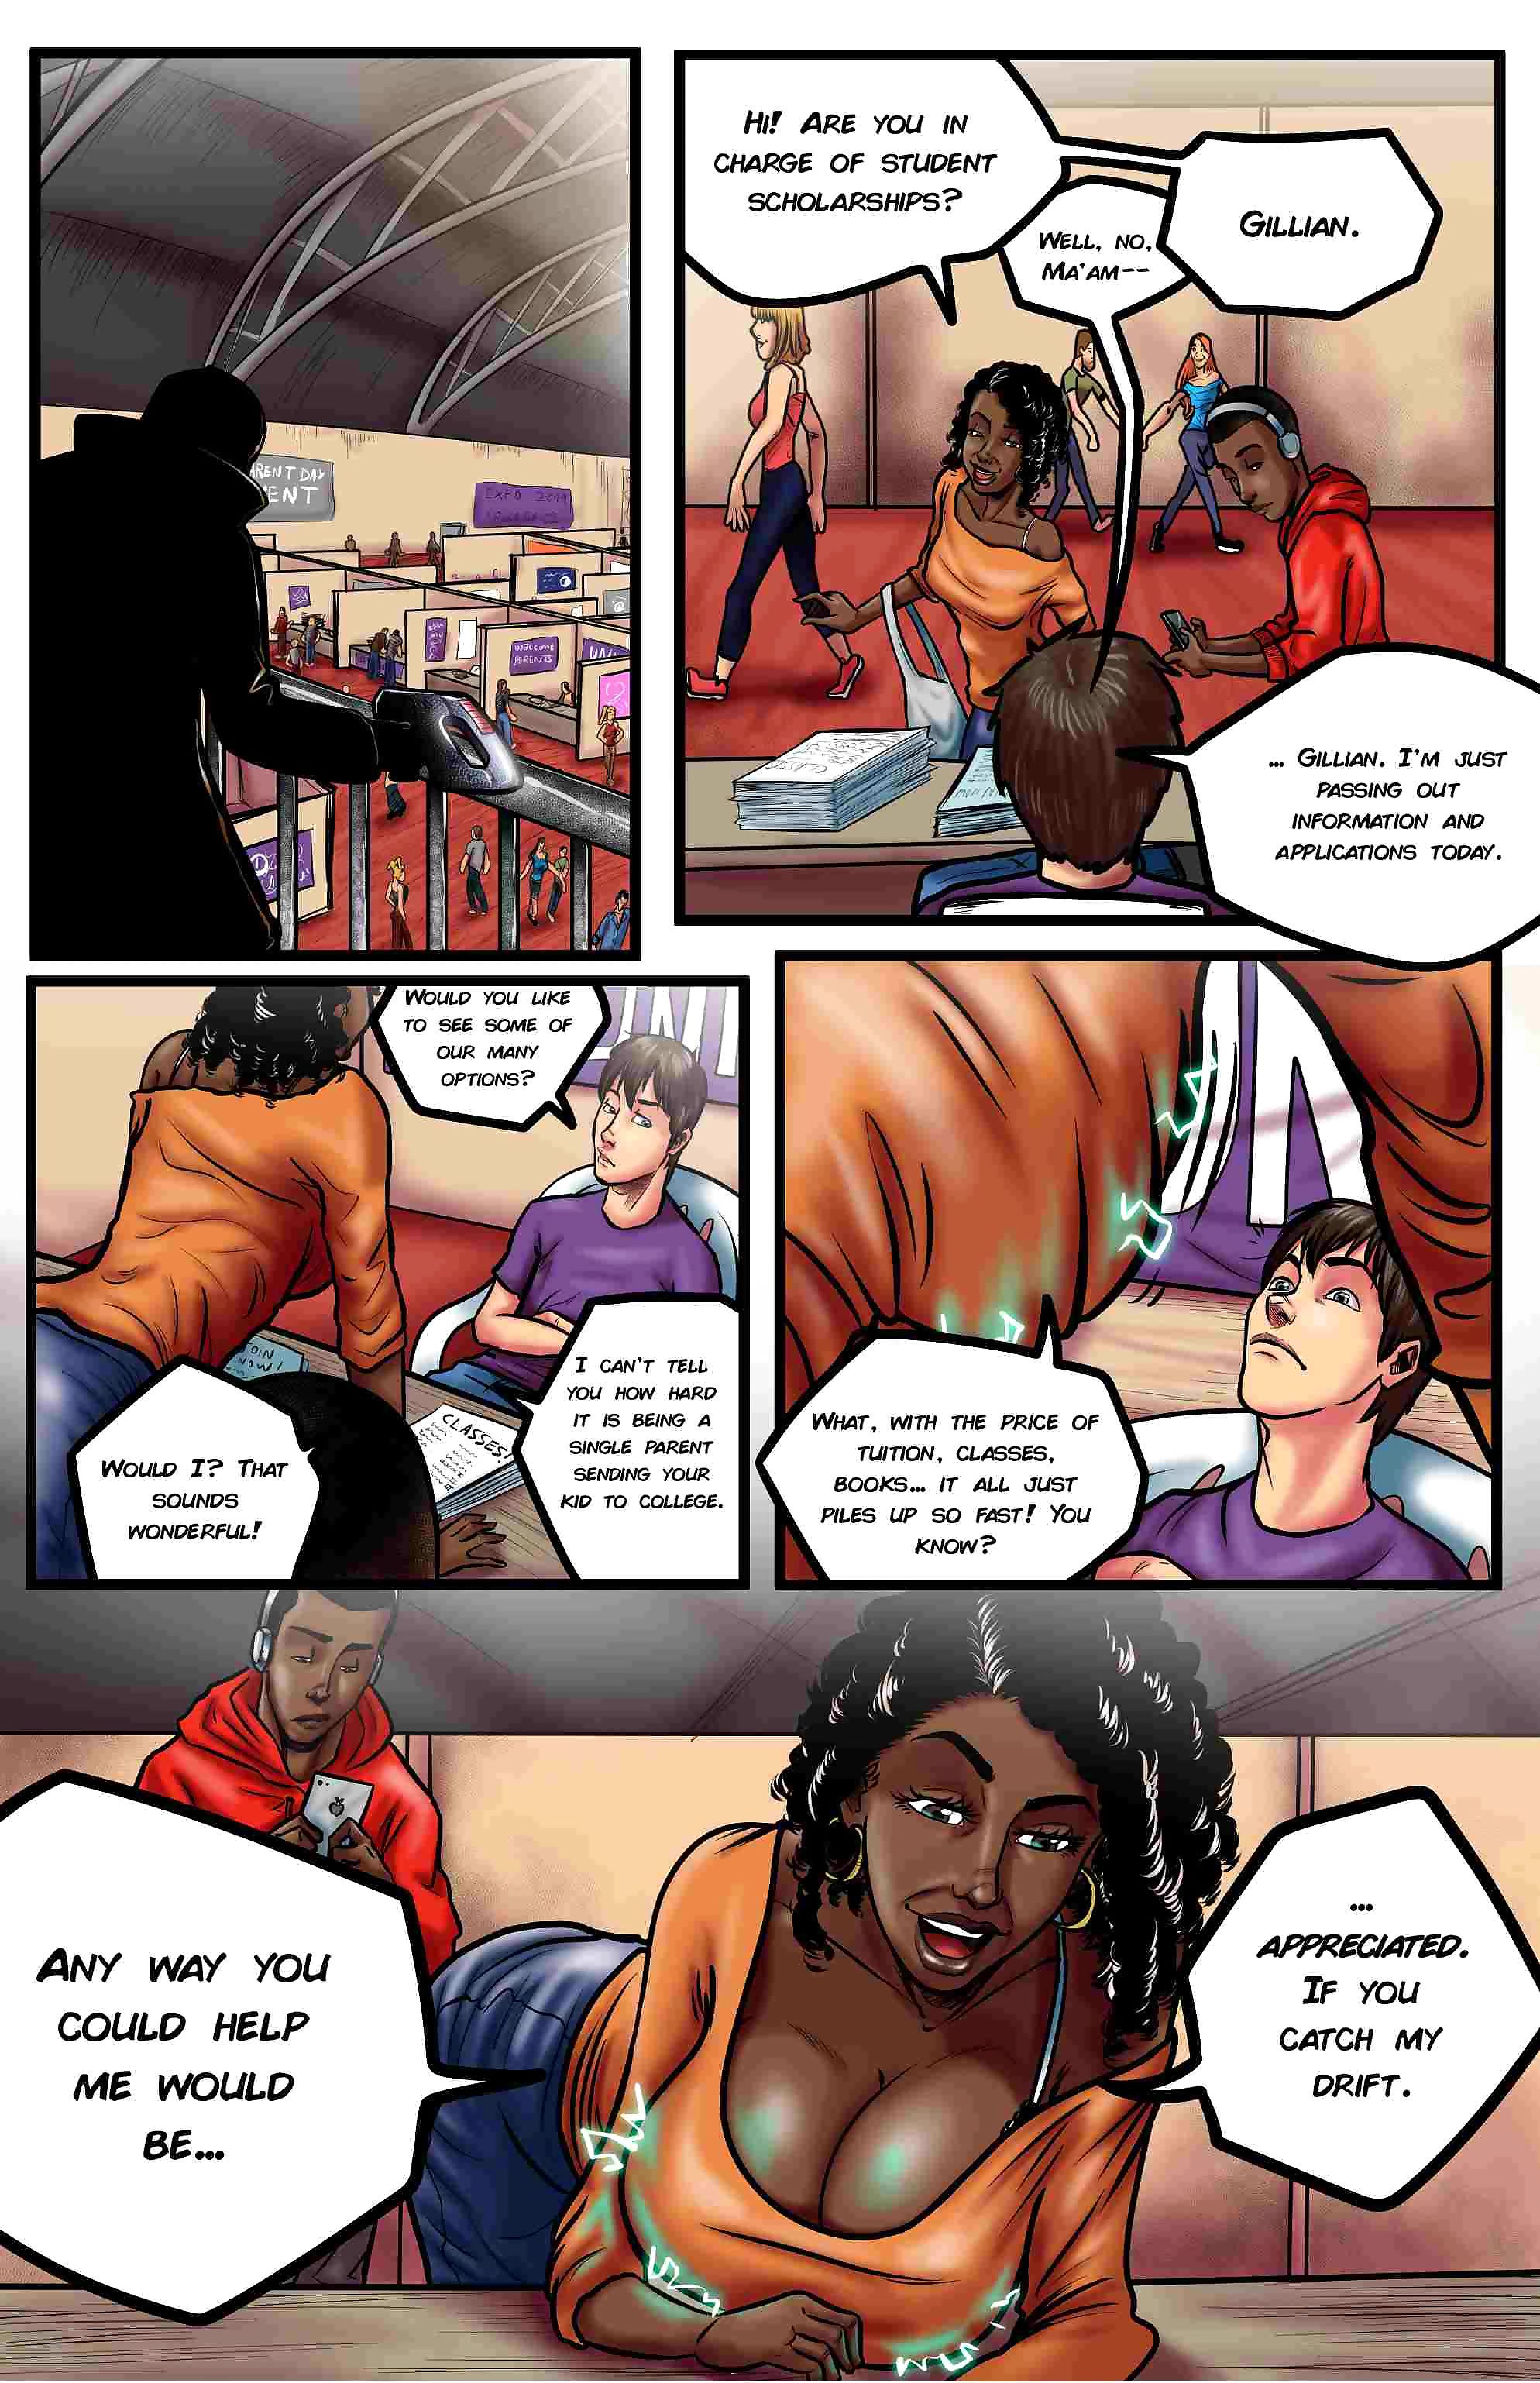 Bot- Seduction Technology Issue 3 page 1